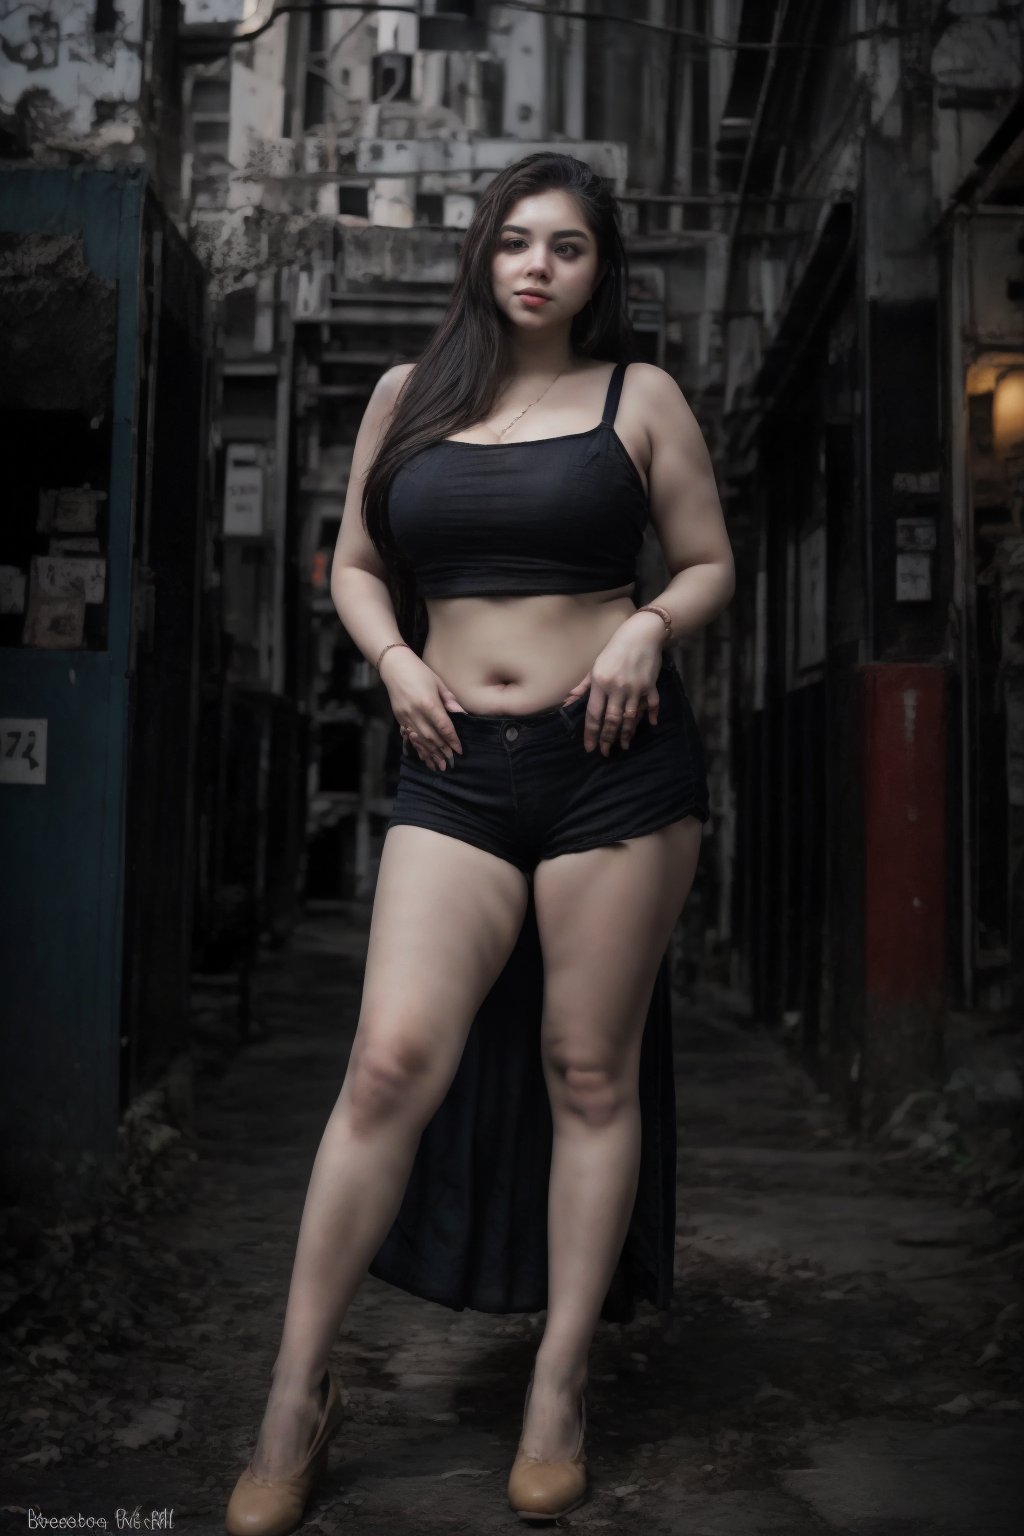 Bra:2, t shirt, Tanktop, plump, Cyberpunk, Neon glow, curvy women:2, milf ,  bubbly, masterpiece, high resolution,  long gown, best quality, 4k, plump face, 38 years old , huge,  women, shorts,  hot pants, thick_hip, solo, beauty photo, amateur photo, skin texture:2, 1girl, eye level, and hoop earrings, red_teal_orange-colored busty ironed straight, stand, room,lighting,photorealistic ,CyberpunkWorld, twin_tailscprebecca,27 year old, dark skin ,Fit girl,Curly girl ,Plump chubby,Manga Background